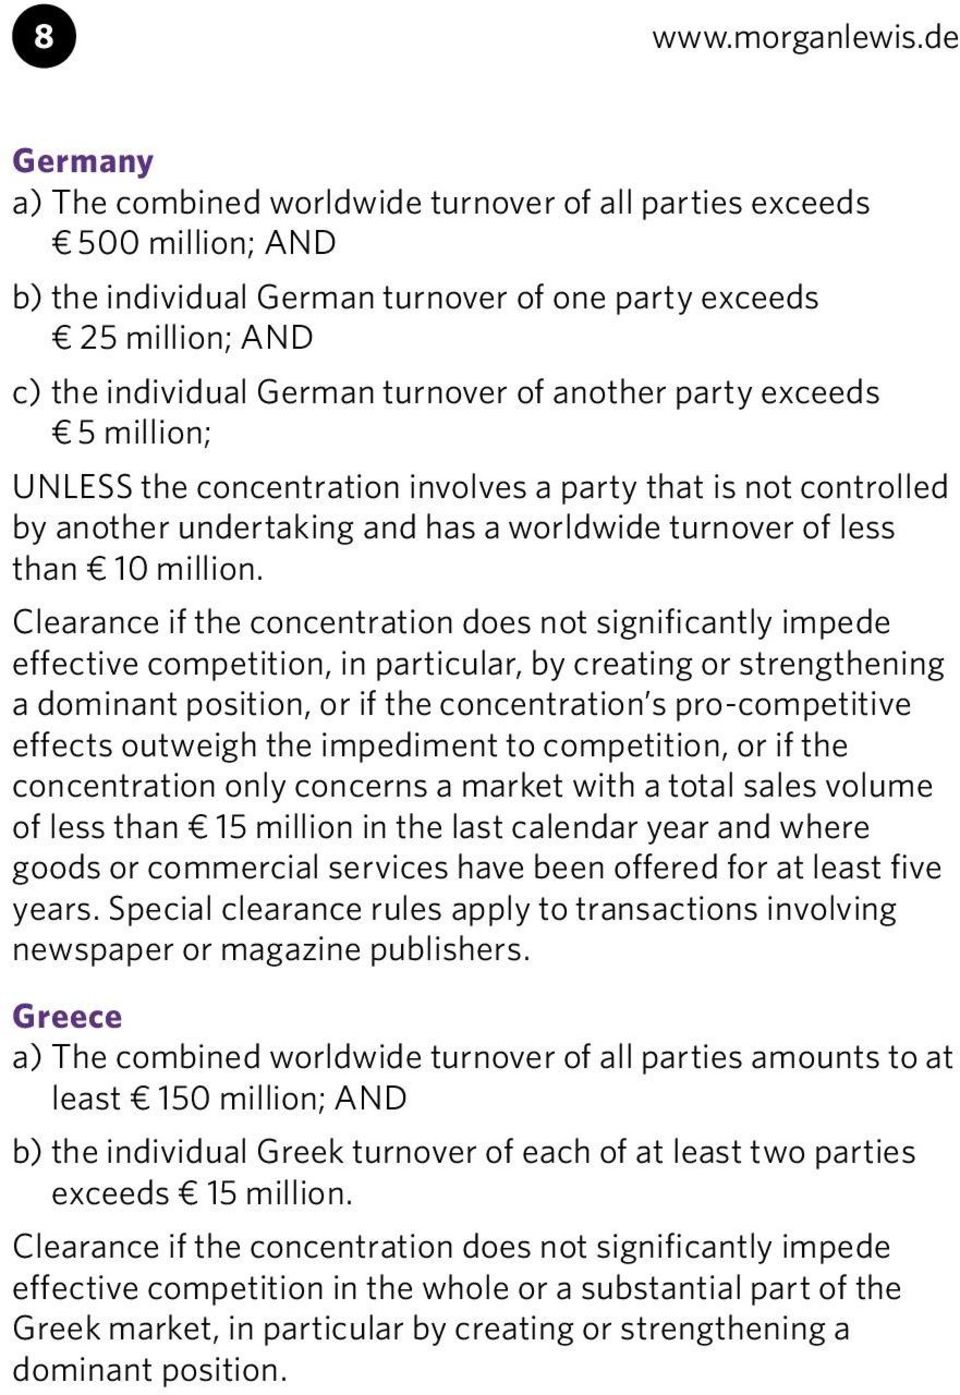 another party exceeds 5 million; UNLESS the concentration involves a party that is not controlled by another undertaking and has a worldwide turnover of less than 10 million.